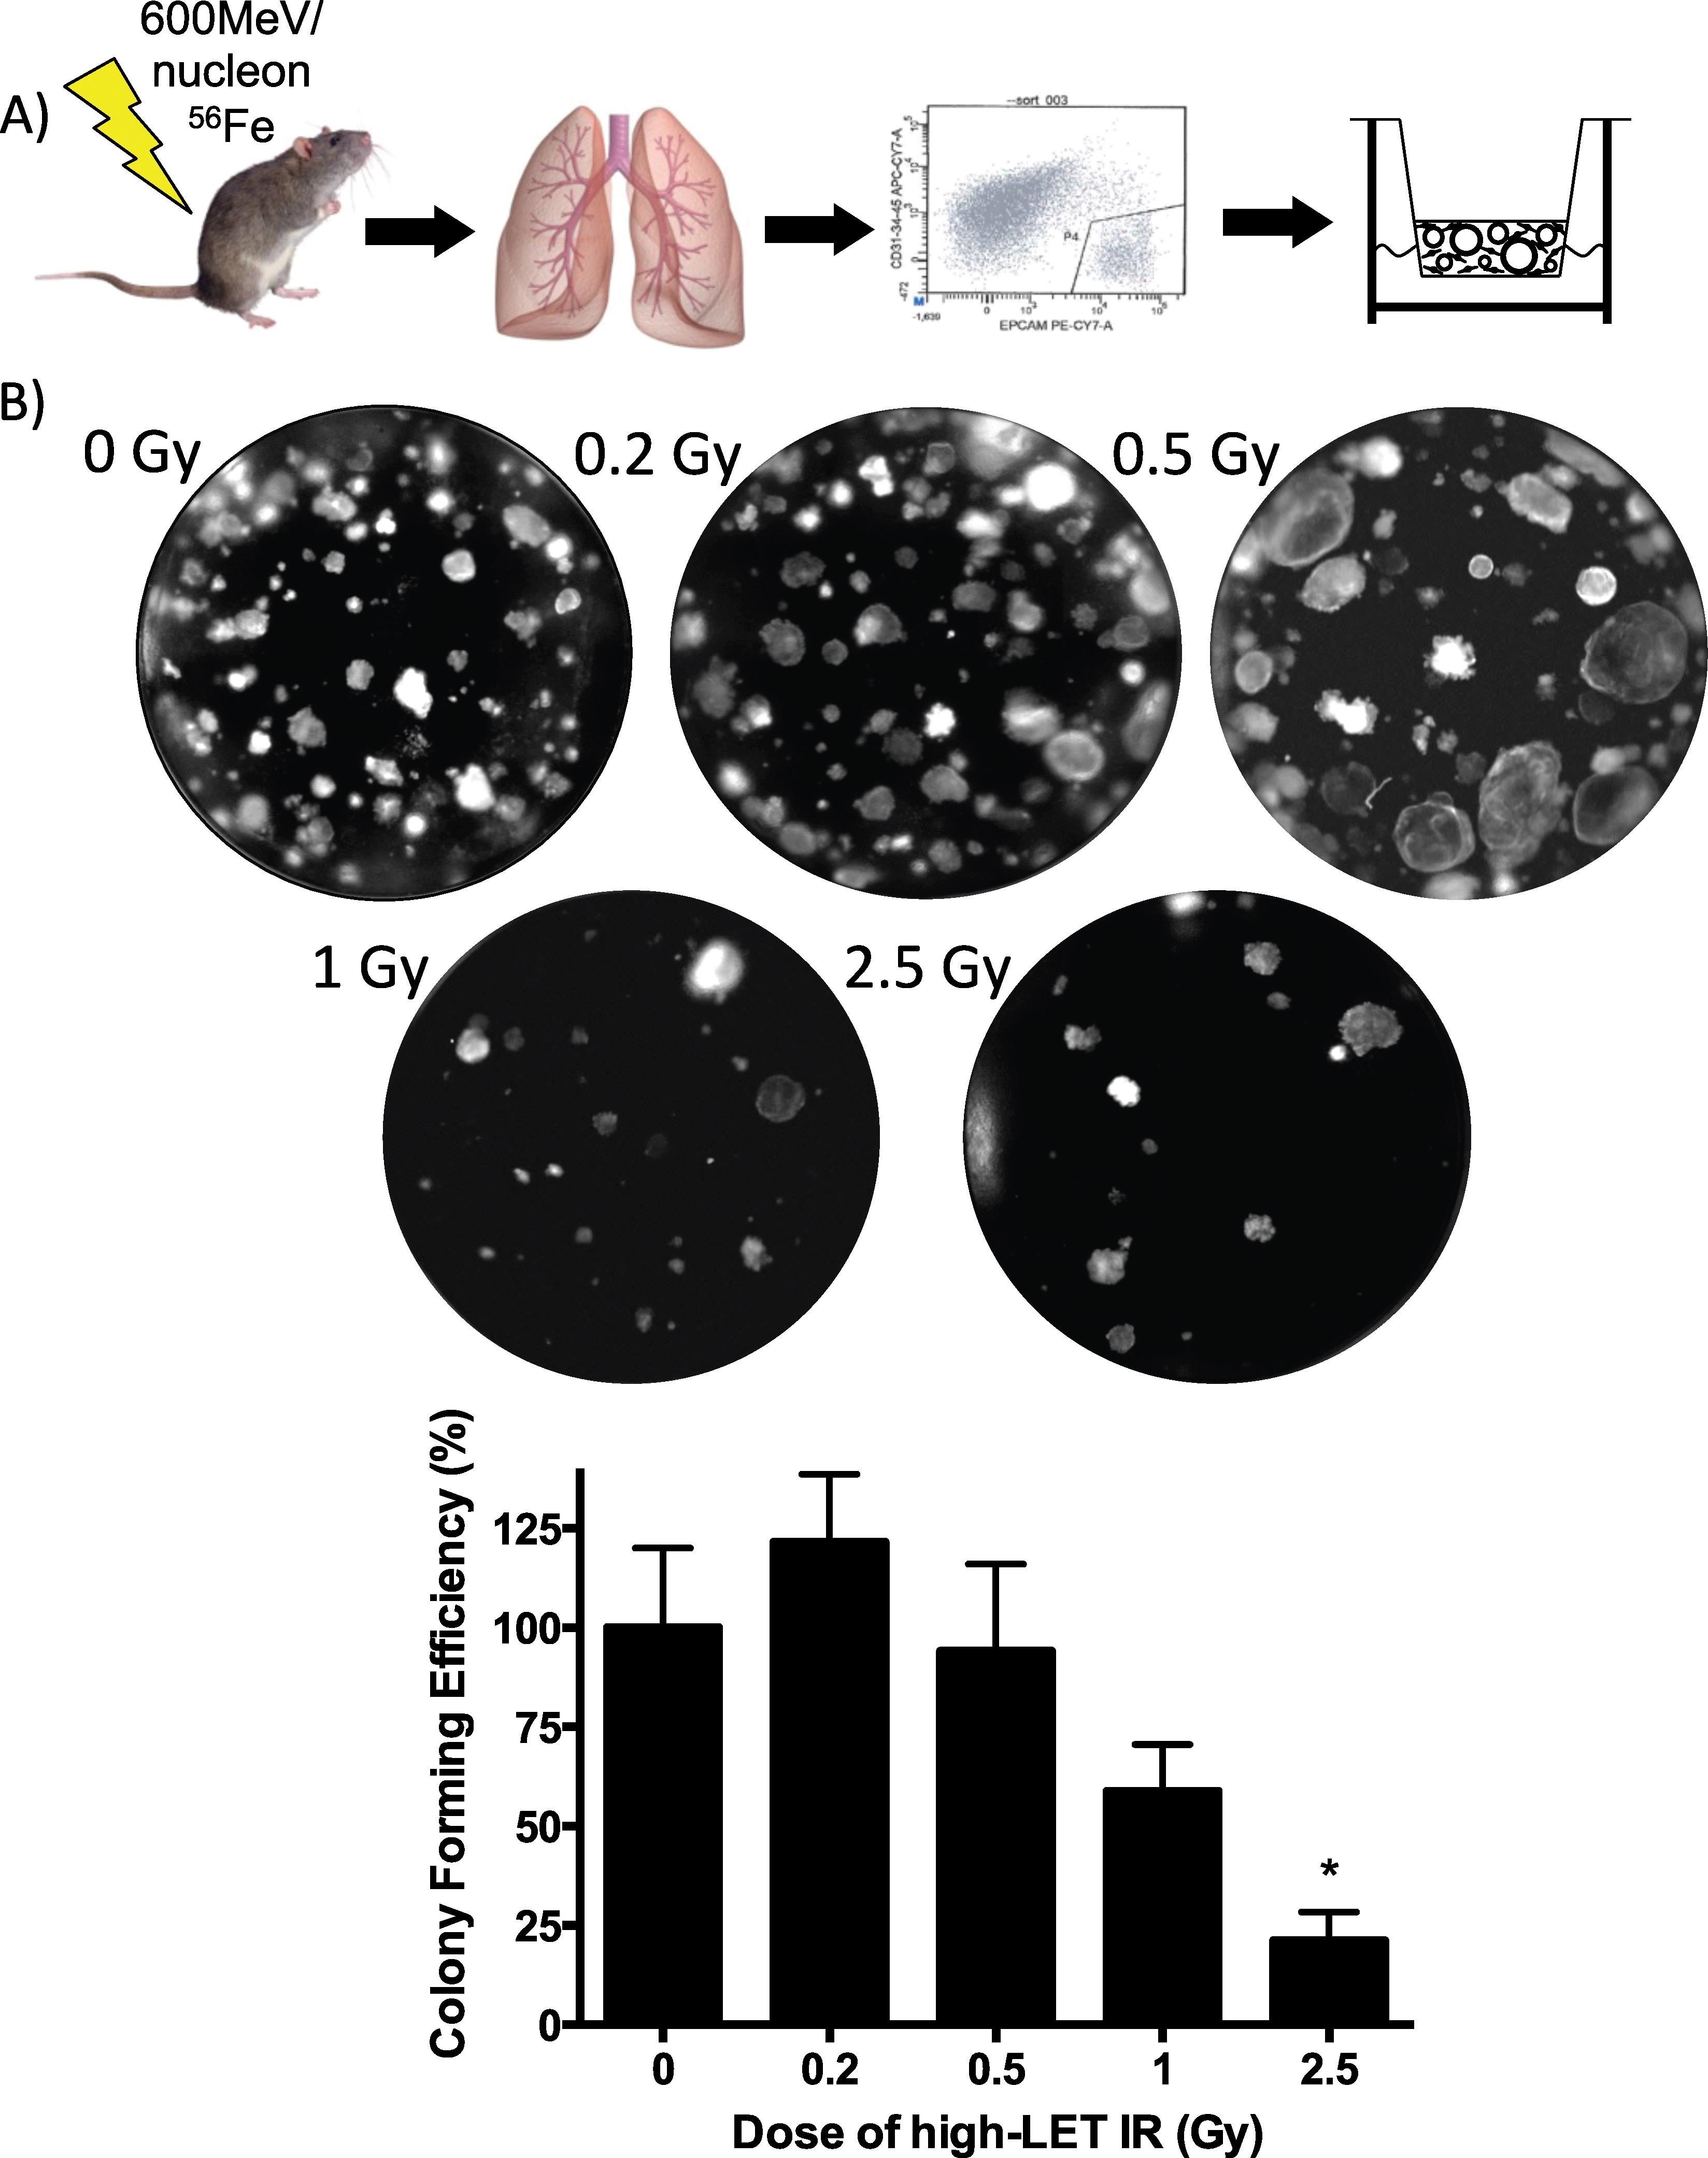 Low And High Let Radiation Drives Clonal Expansion Of Lung Progenitor Cells In Vivo